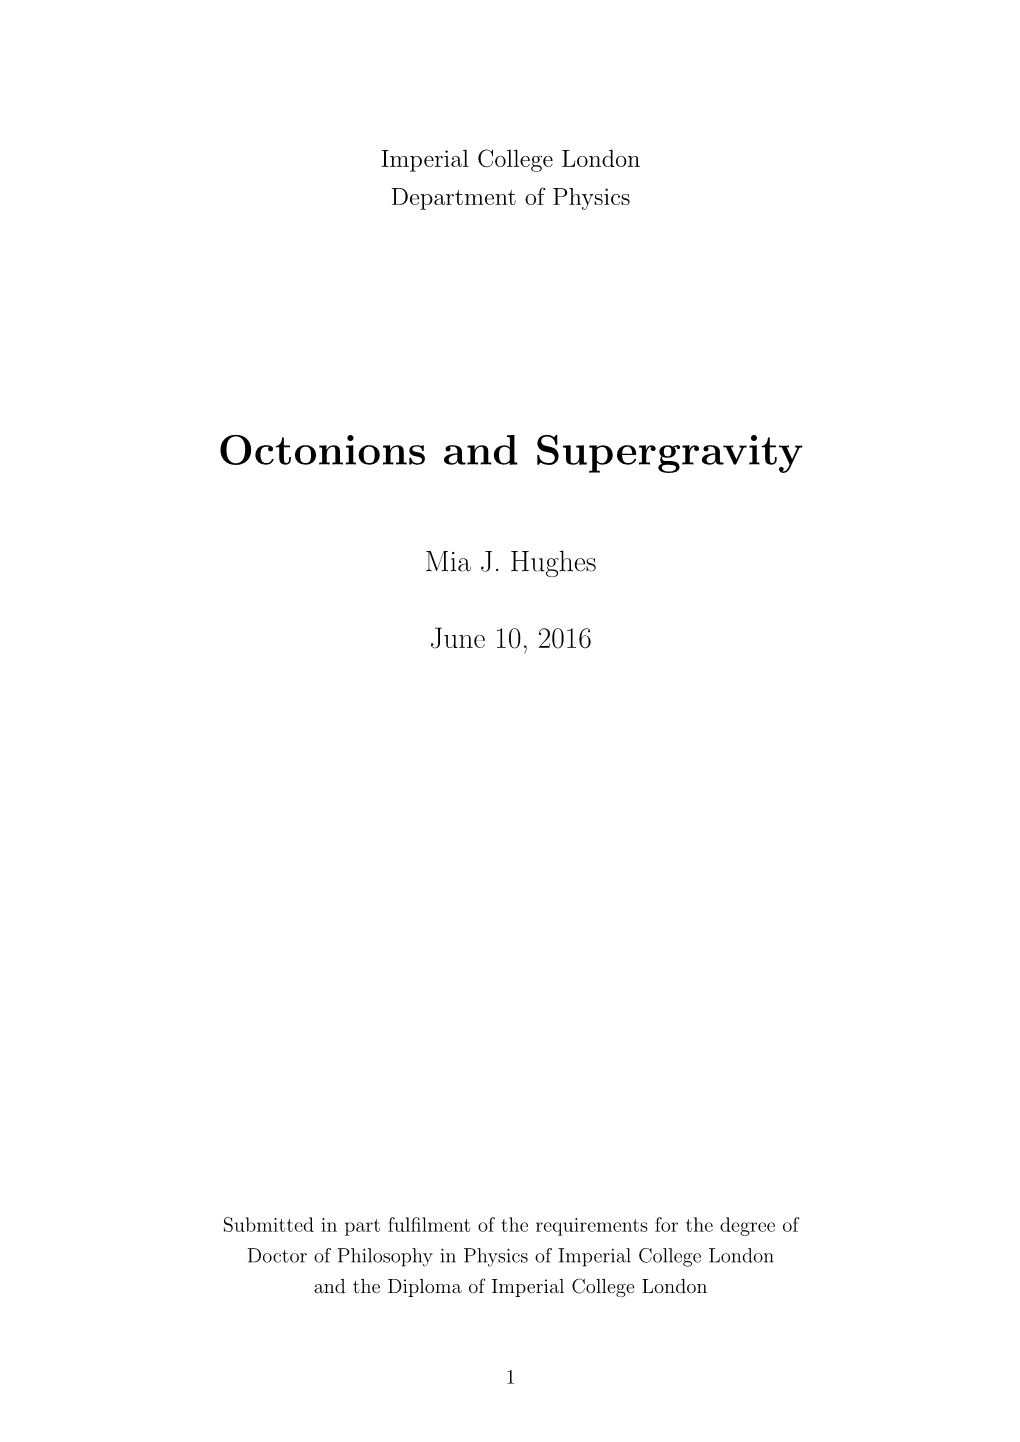 Octonions and Supergravity